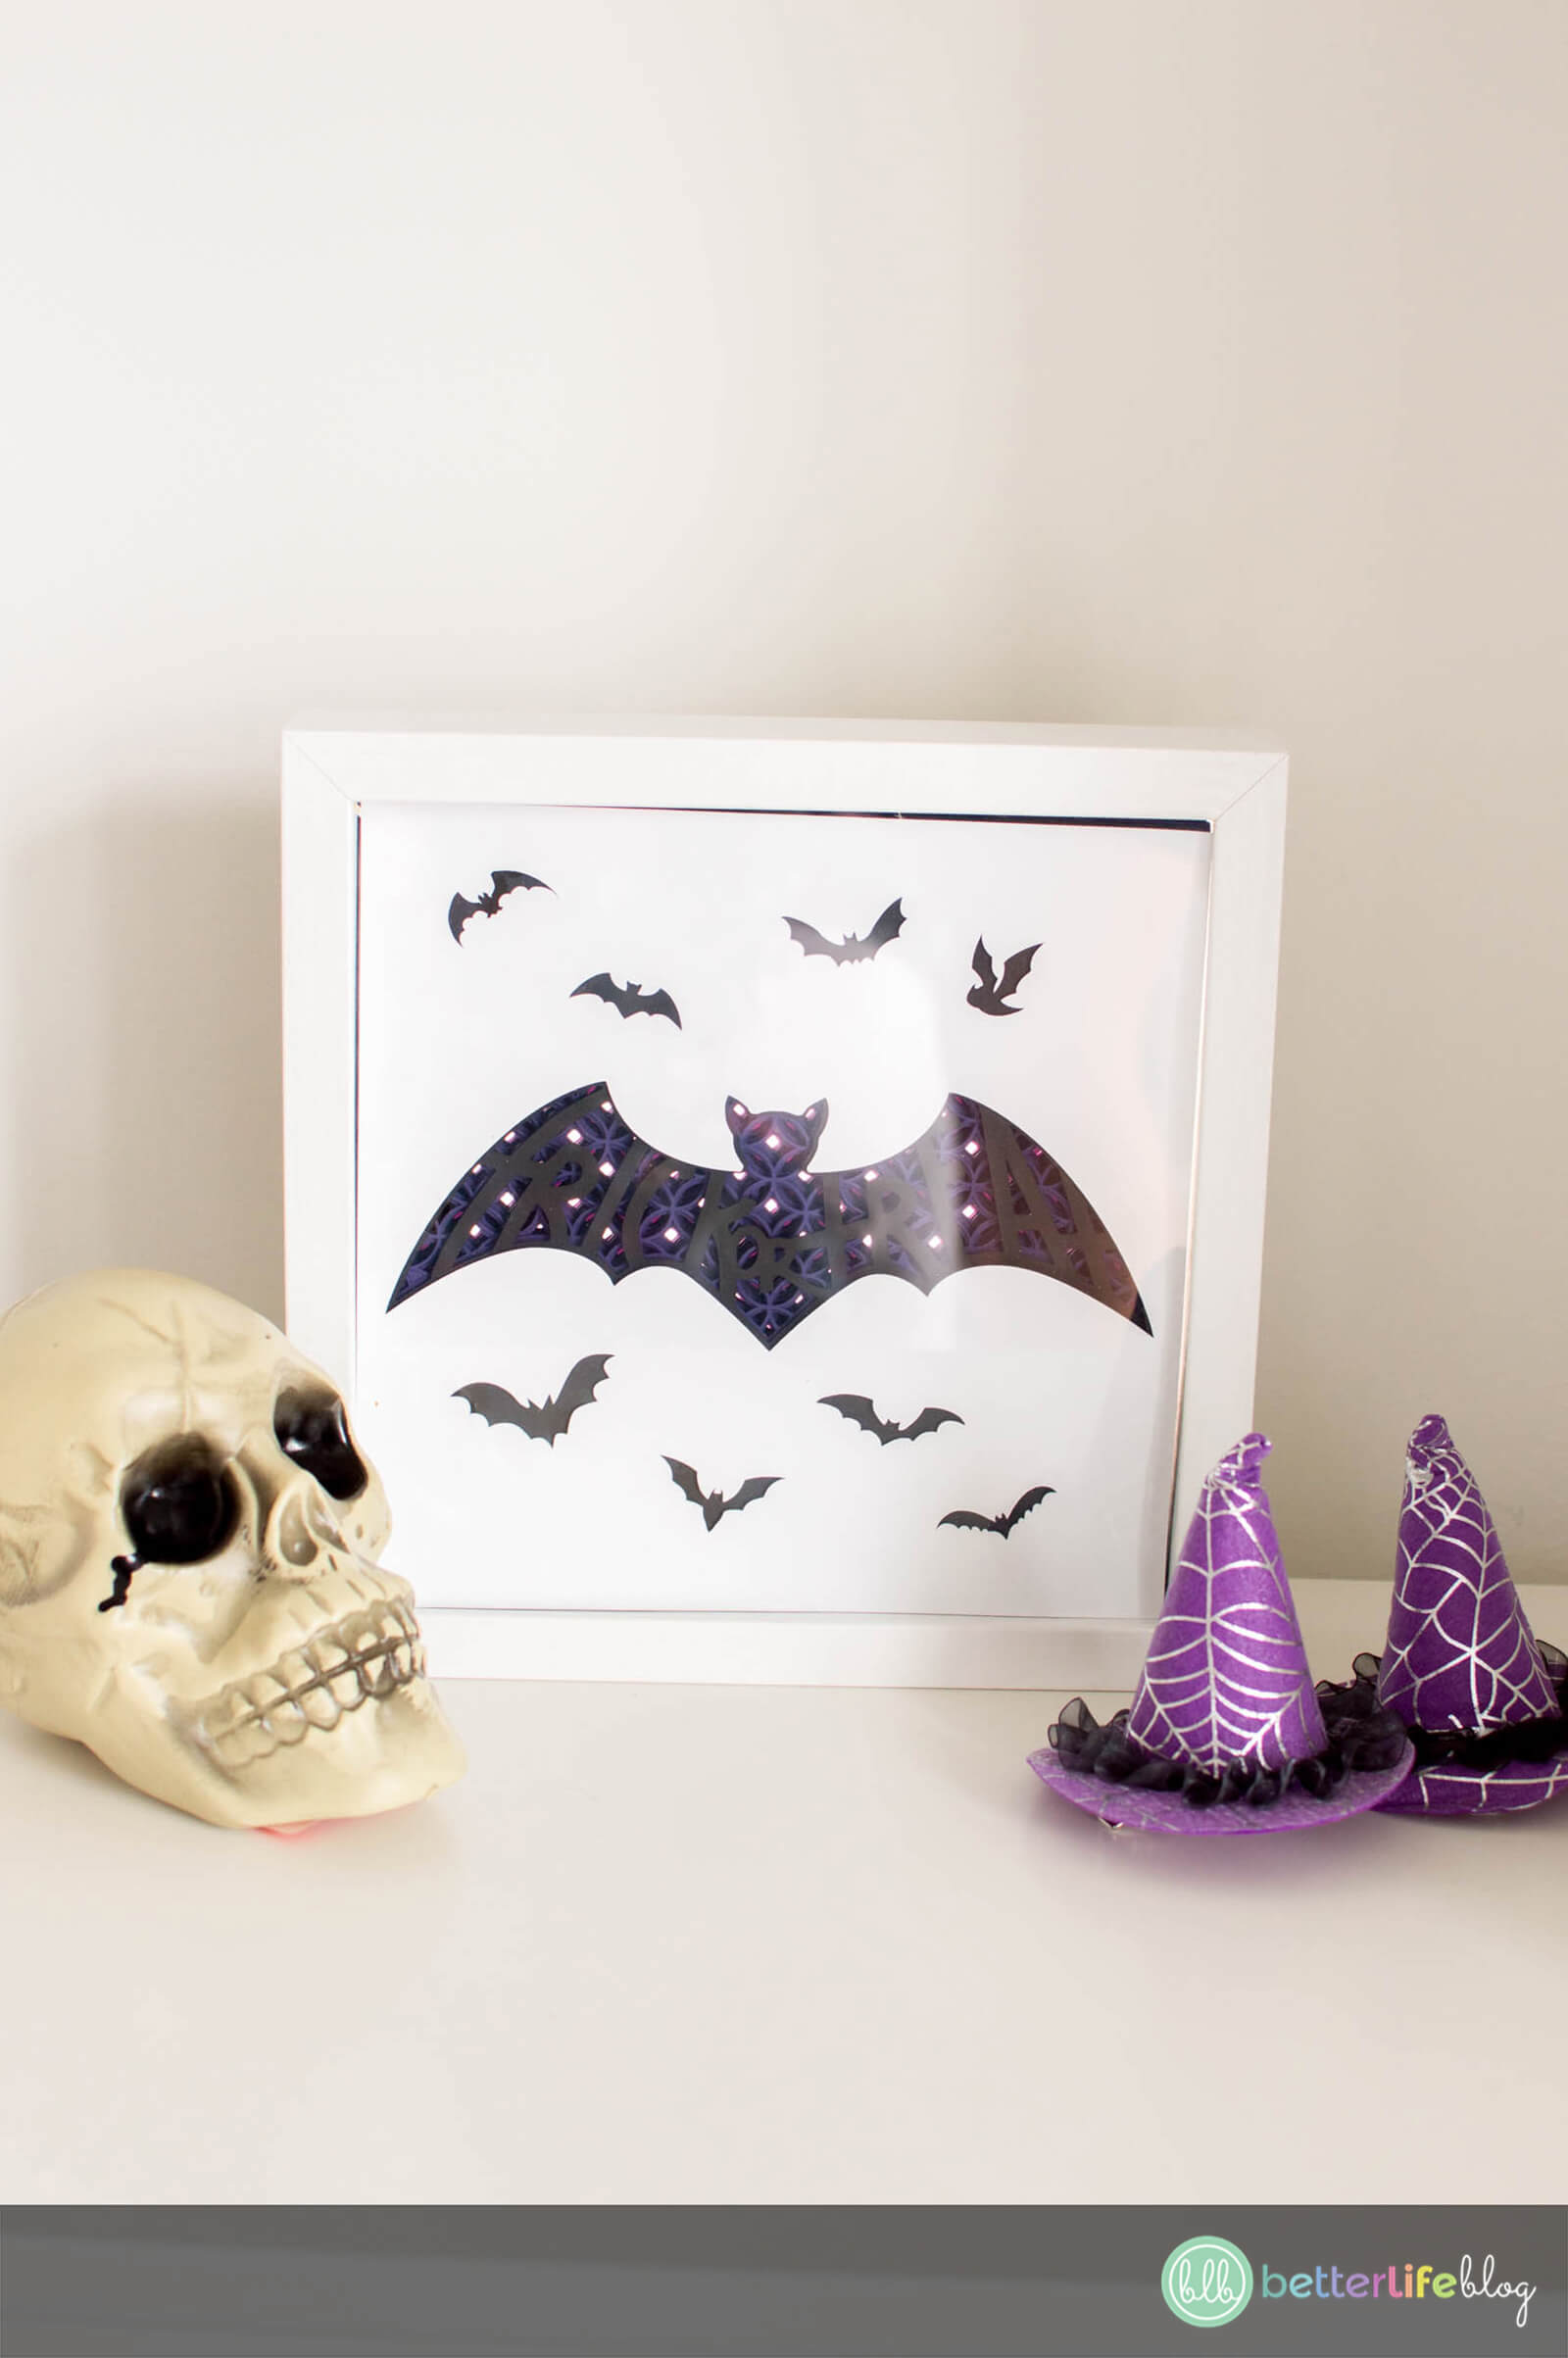 You’ll look like a crafting pro once you put together this super easy Halloween Shadow Box! It boasts a beautiful design that’s both intricate and detailed – you’ll be so surprised how simple it is to DIY!